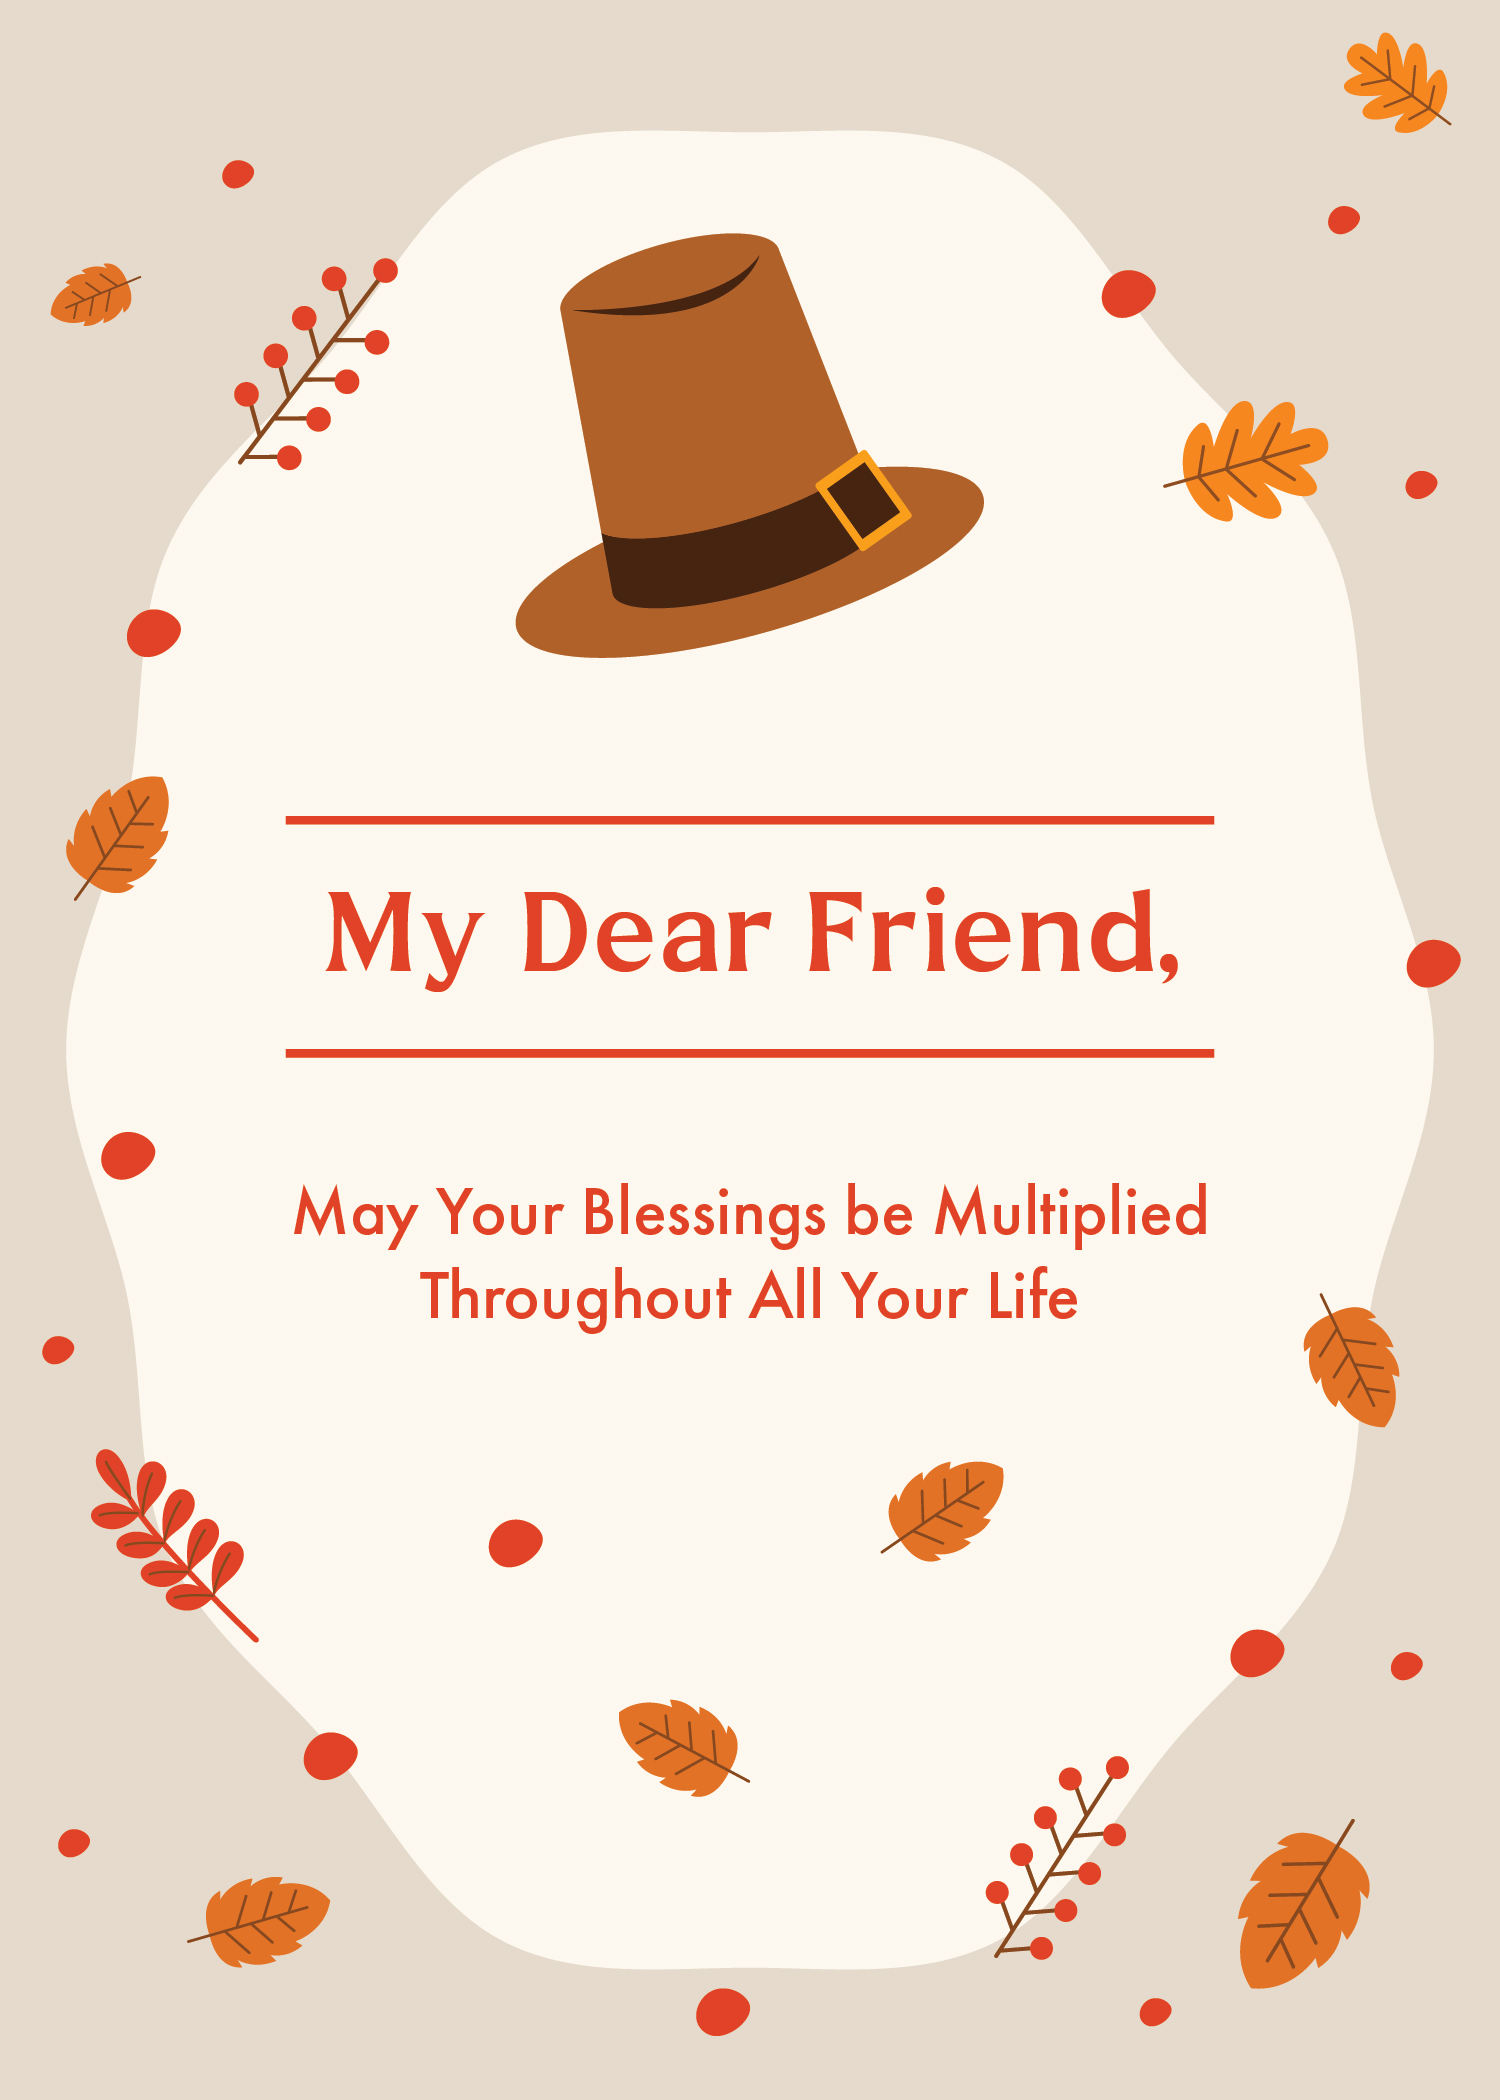 Thanksgiving Day Wishes For Friend in Word, Google Docs, Illustrator, PSD, Apple Pages, Publisher, EPS, SVG, JPG, PNG